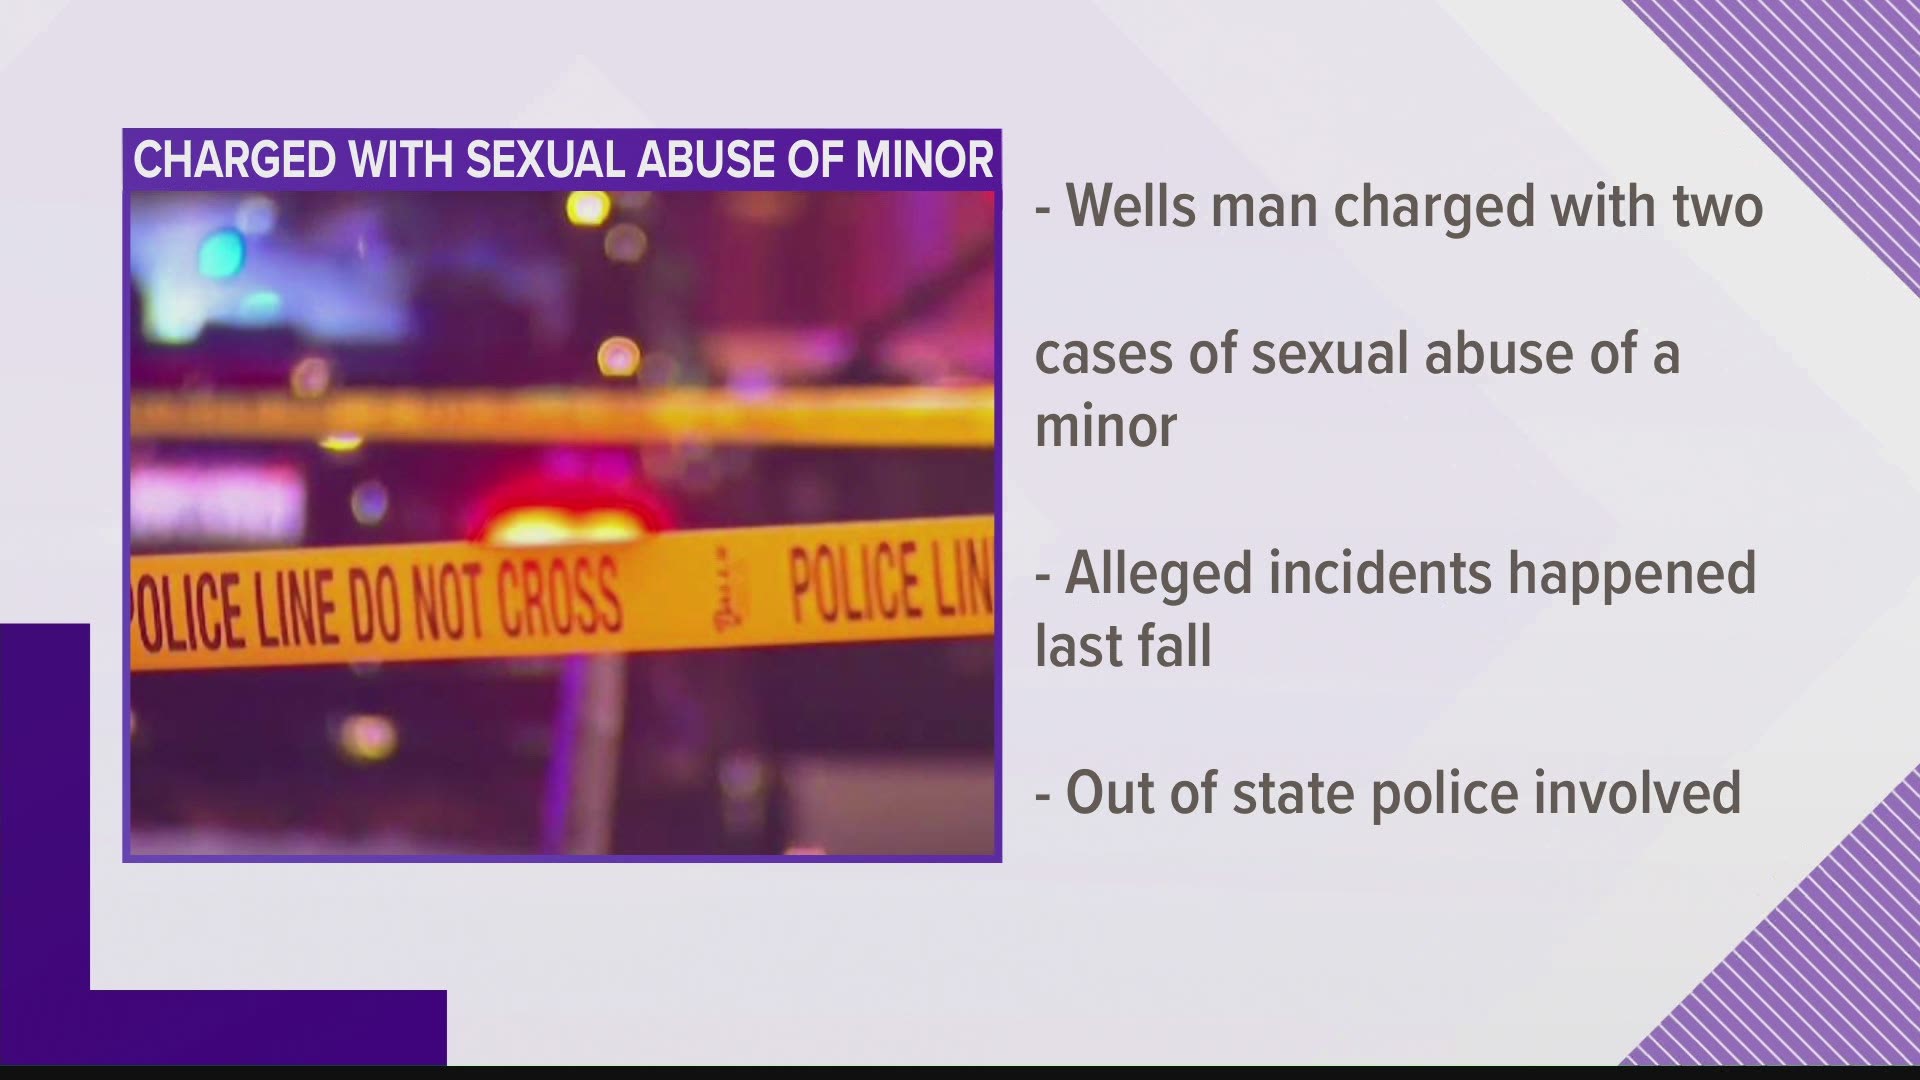 A man from Wells is facing charges of sexual abuse of a minor.